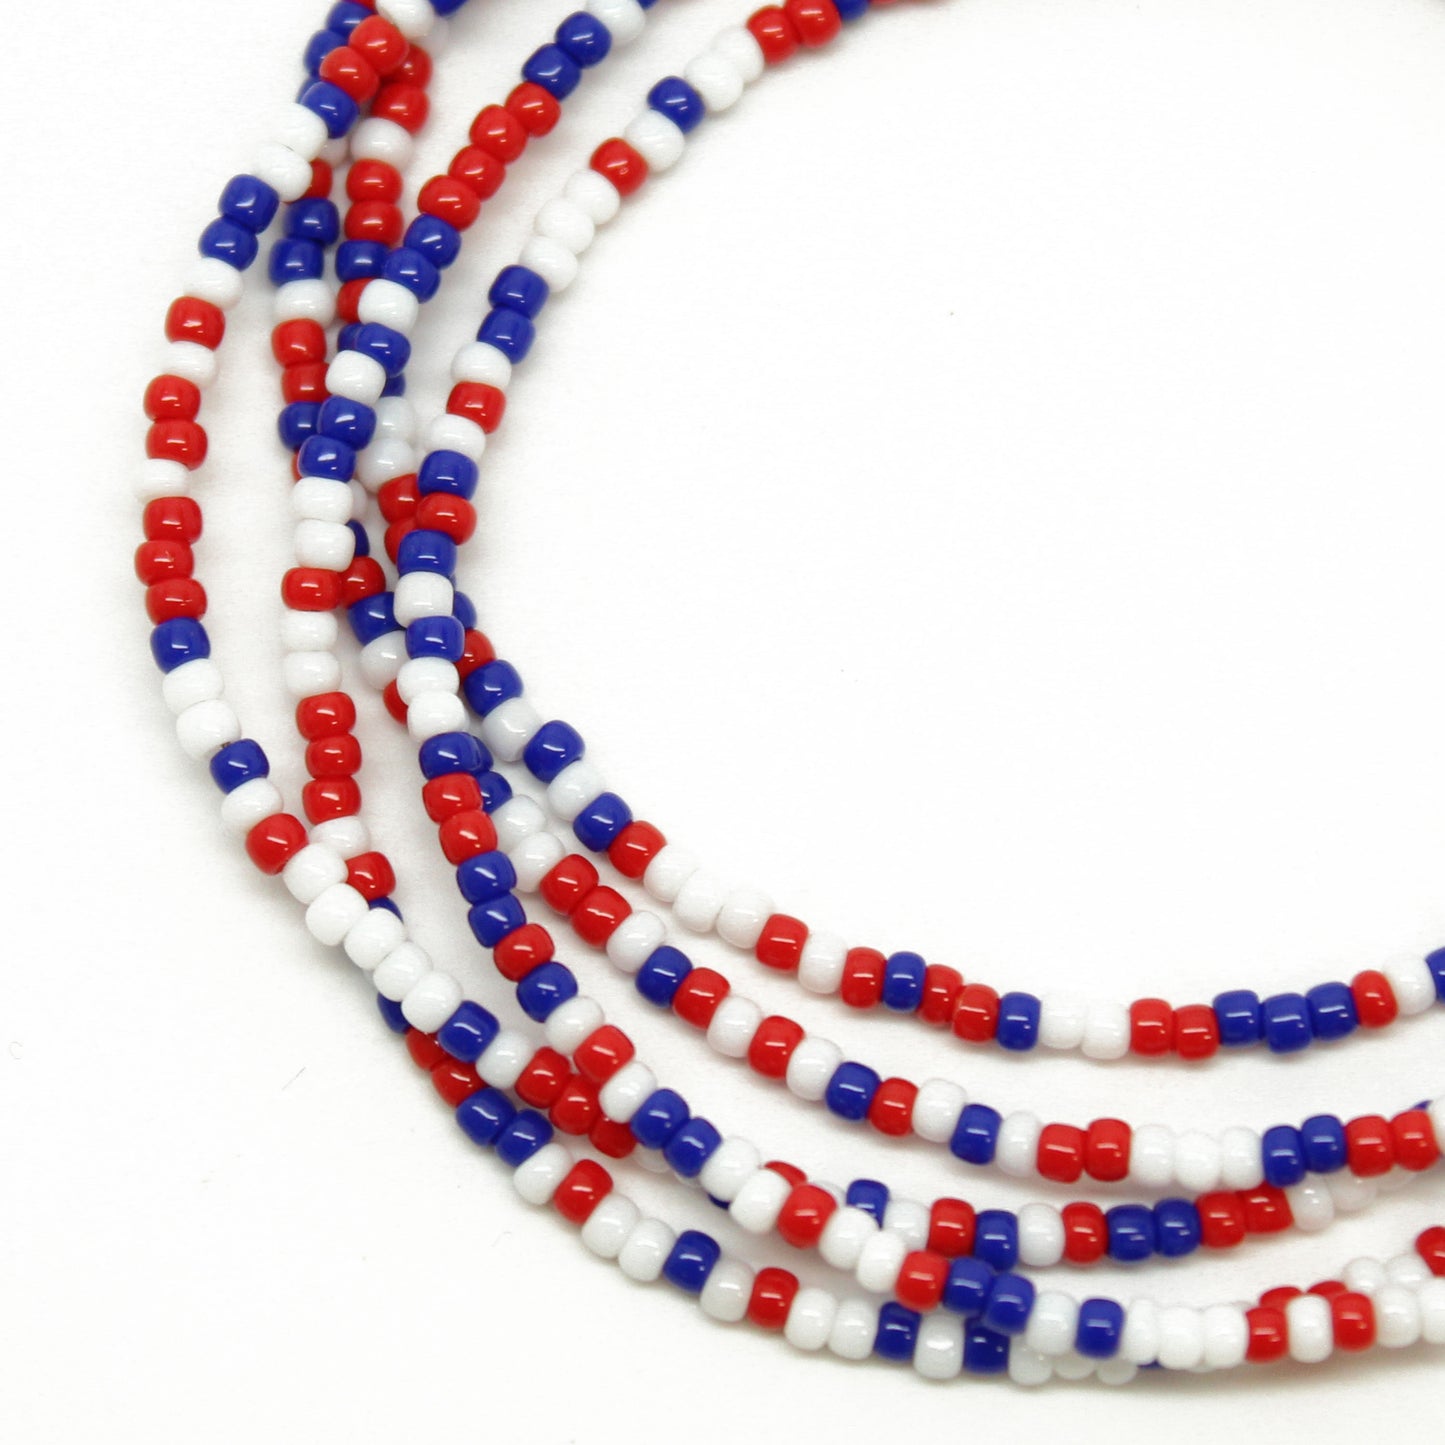 Red Seed Bead Necklace, Thin 1.5mm Single Strand – Kathy Bankston